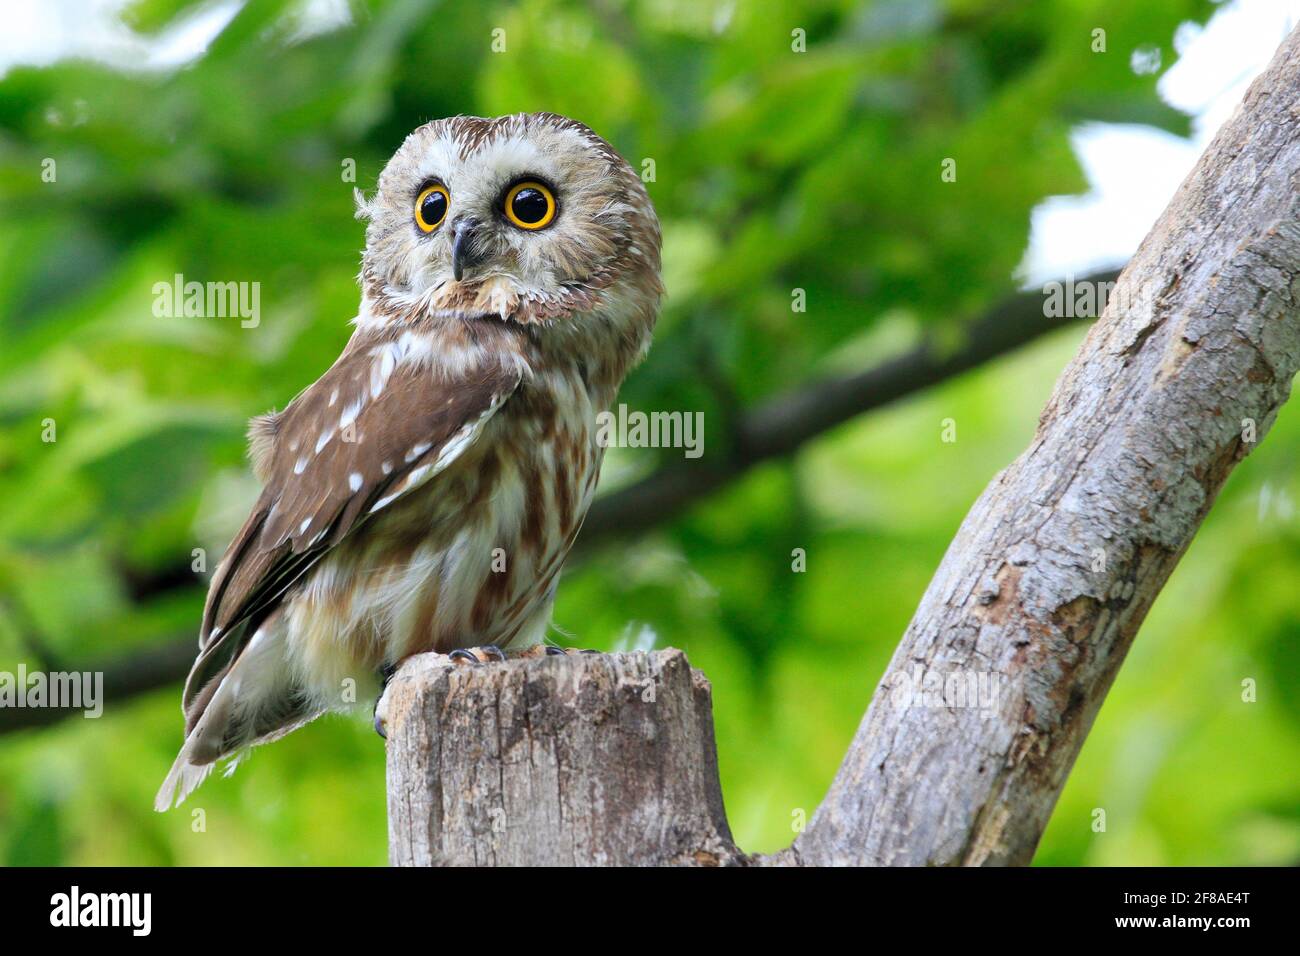 Close-up of Saw Whet Owl Perched on Branch with Green Background Stock Photo